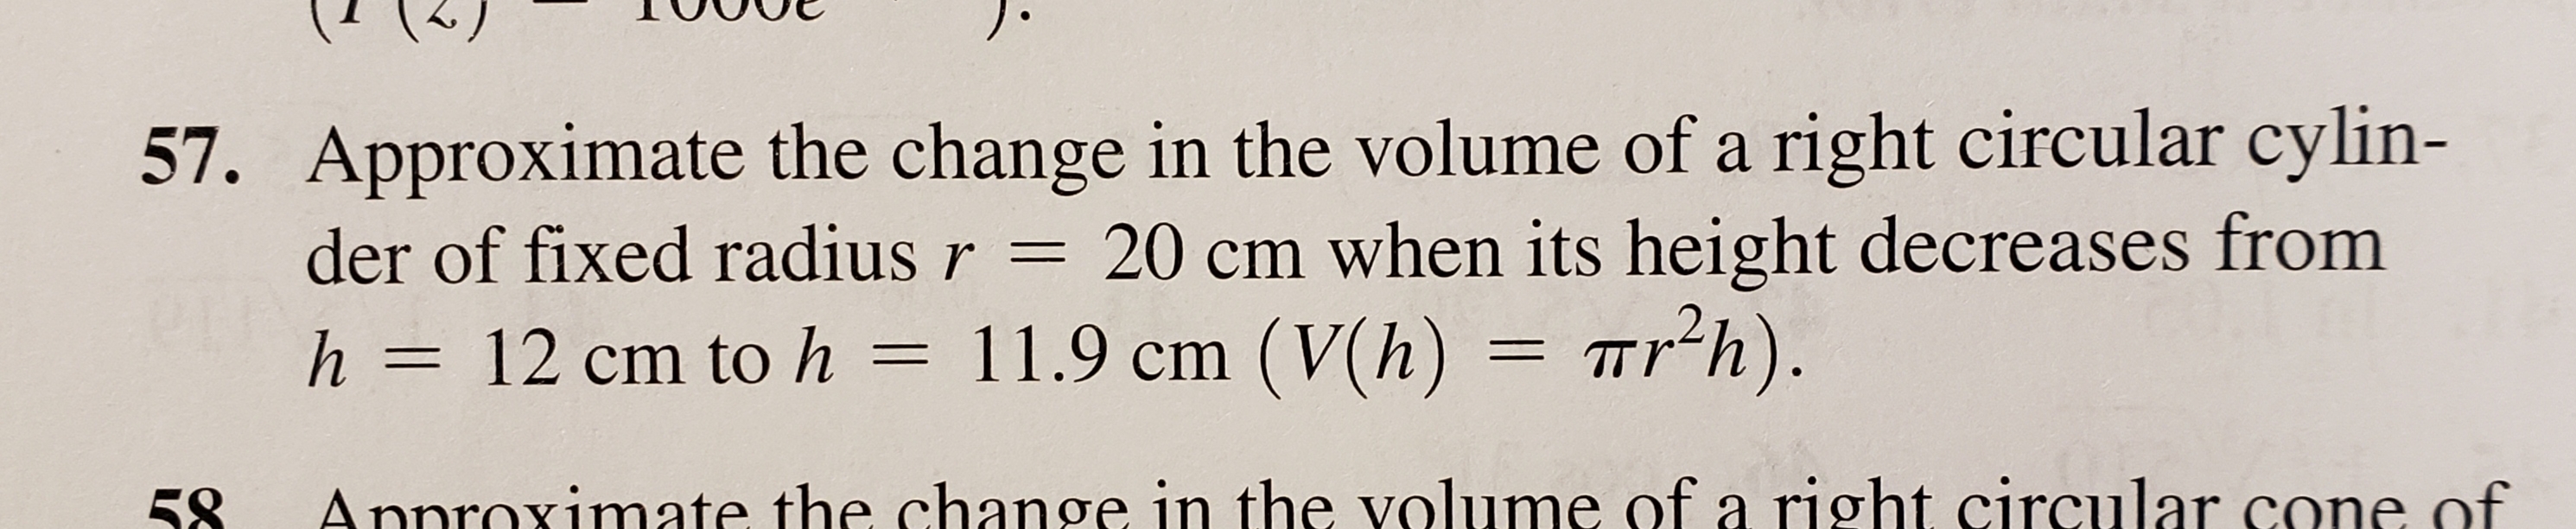 57. Approximate the change in the volume of a right circular cylin-
der of fixed radius r = 20 cm when its height decreases from
11.9 cm (V(h)= Trh).
h = 12 cm to h
Annroximate the change in the volume of a right circular cone of
58
